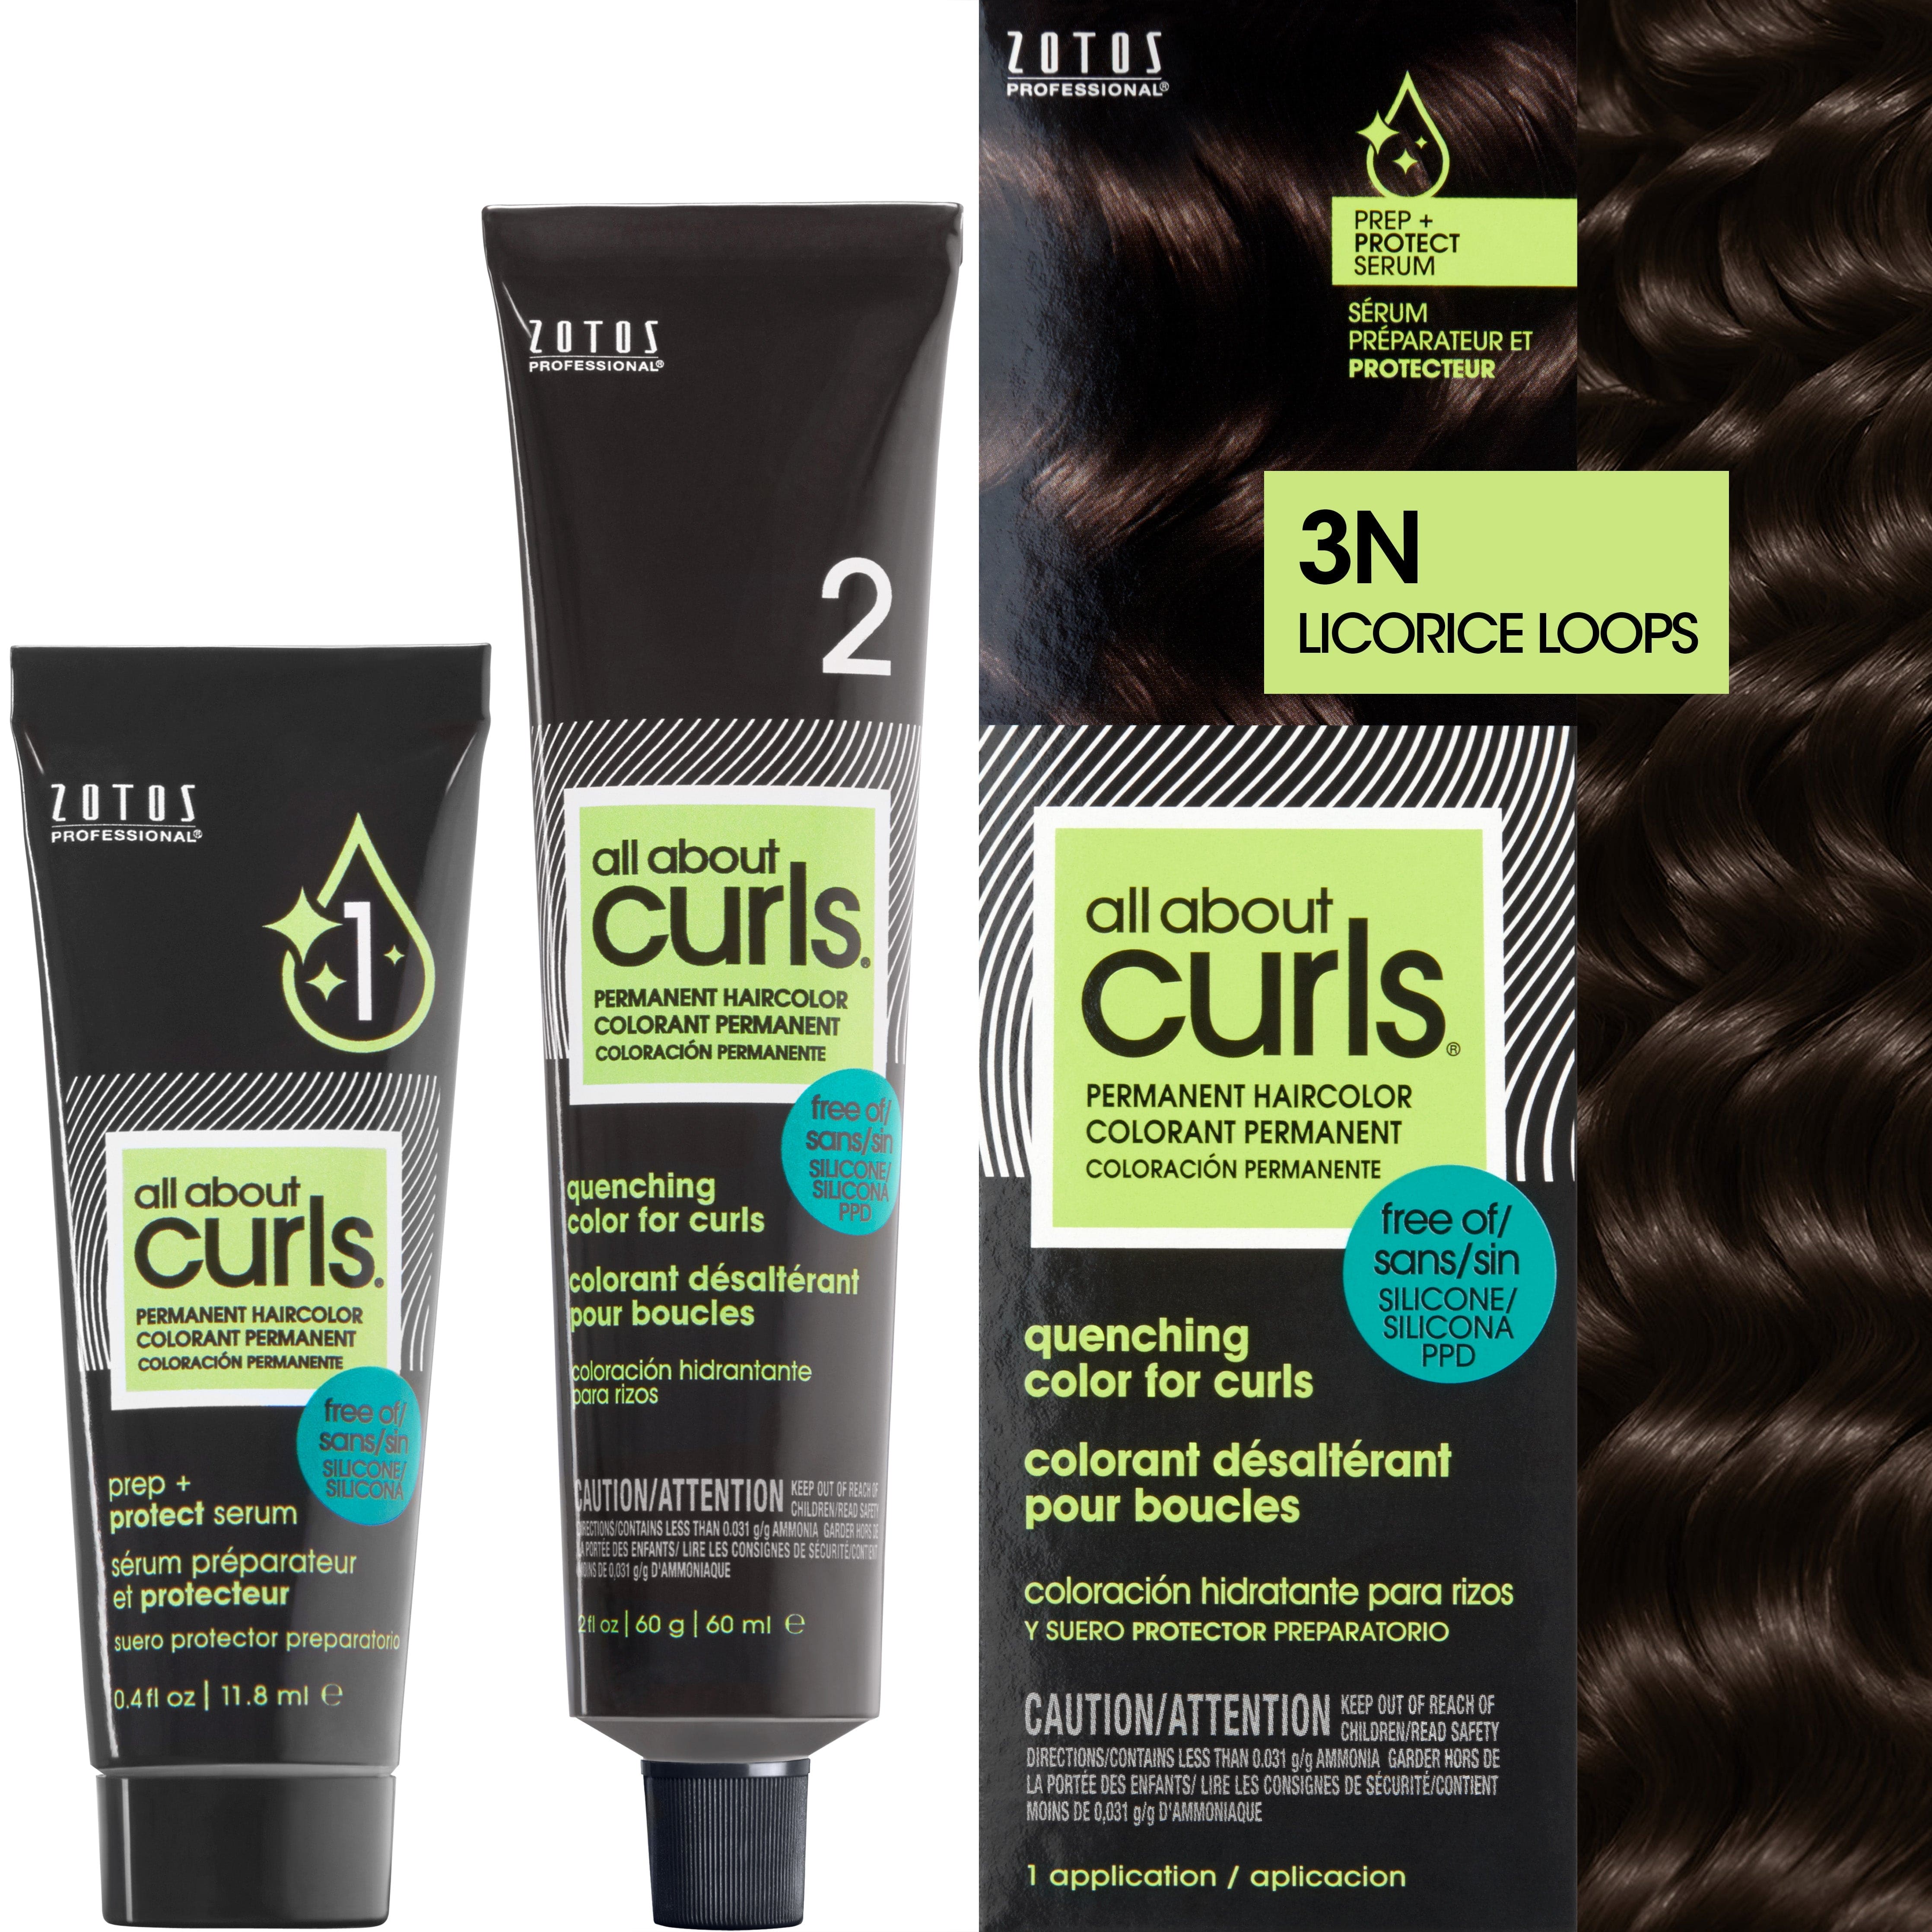 Two bottles and packaging for All About Curls Permanent Color in shade 3N Licorice Loops.